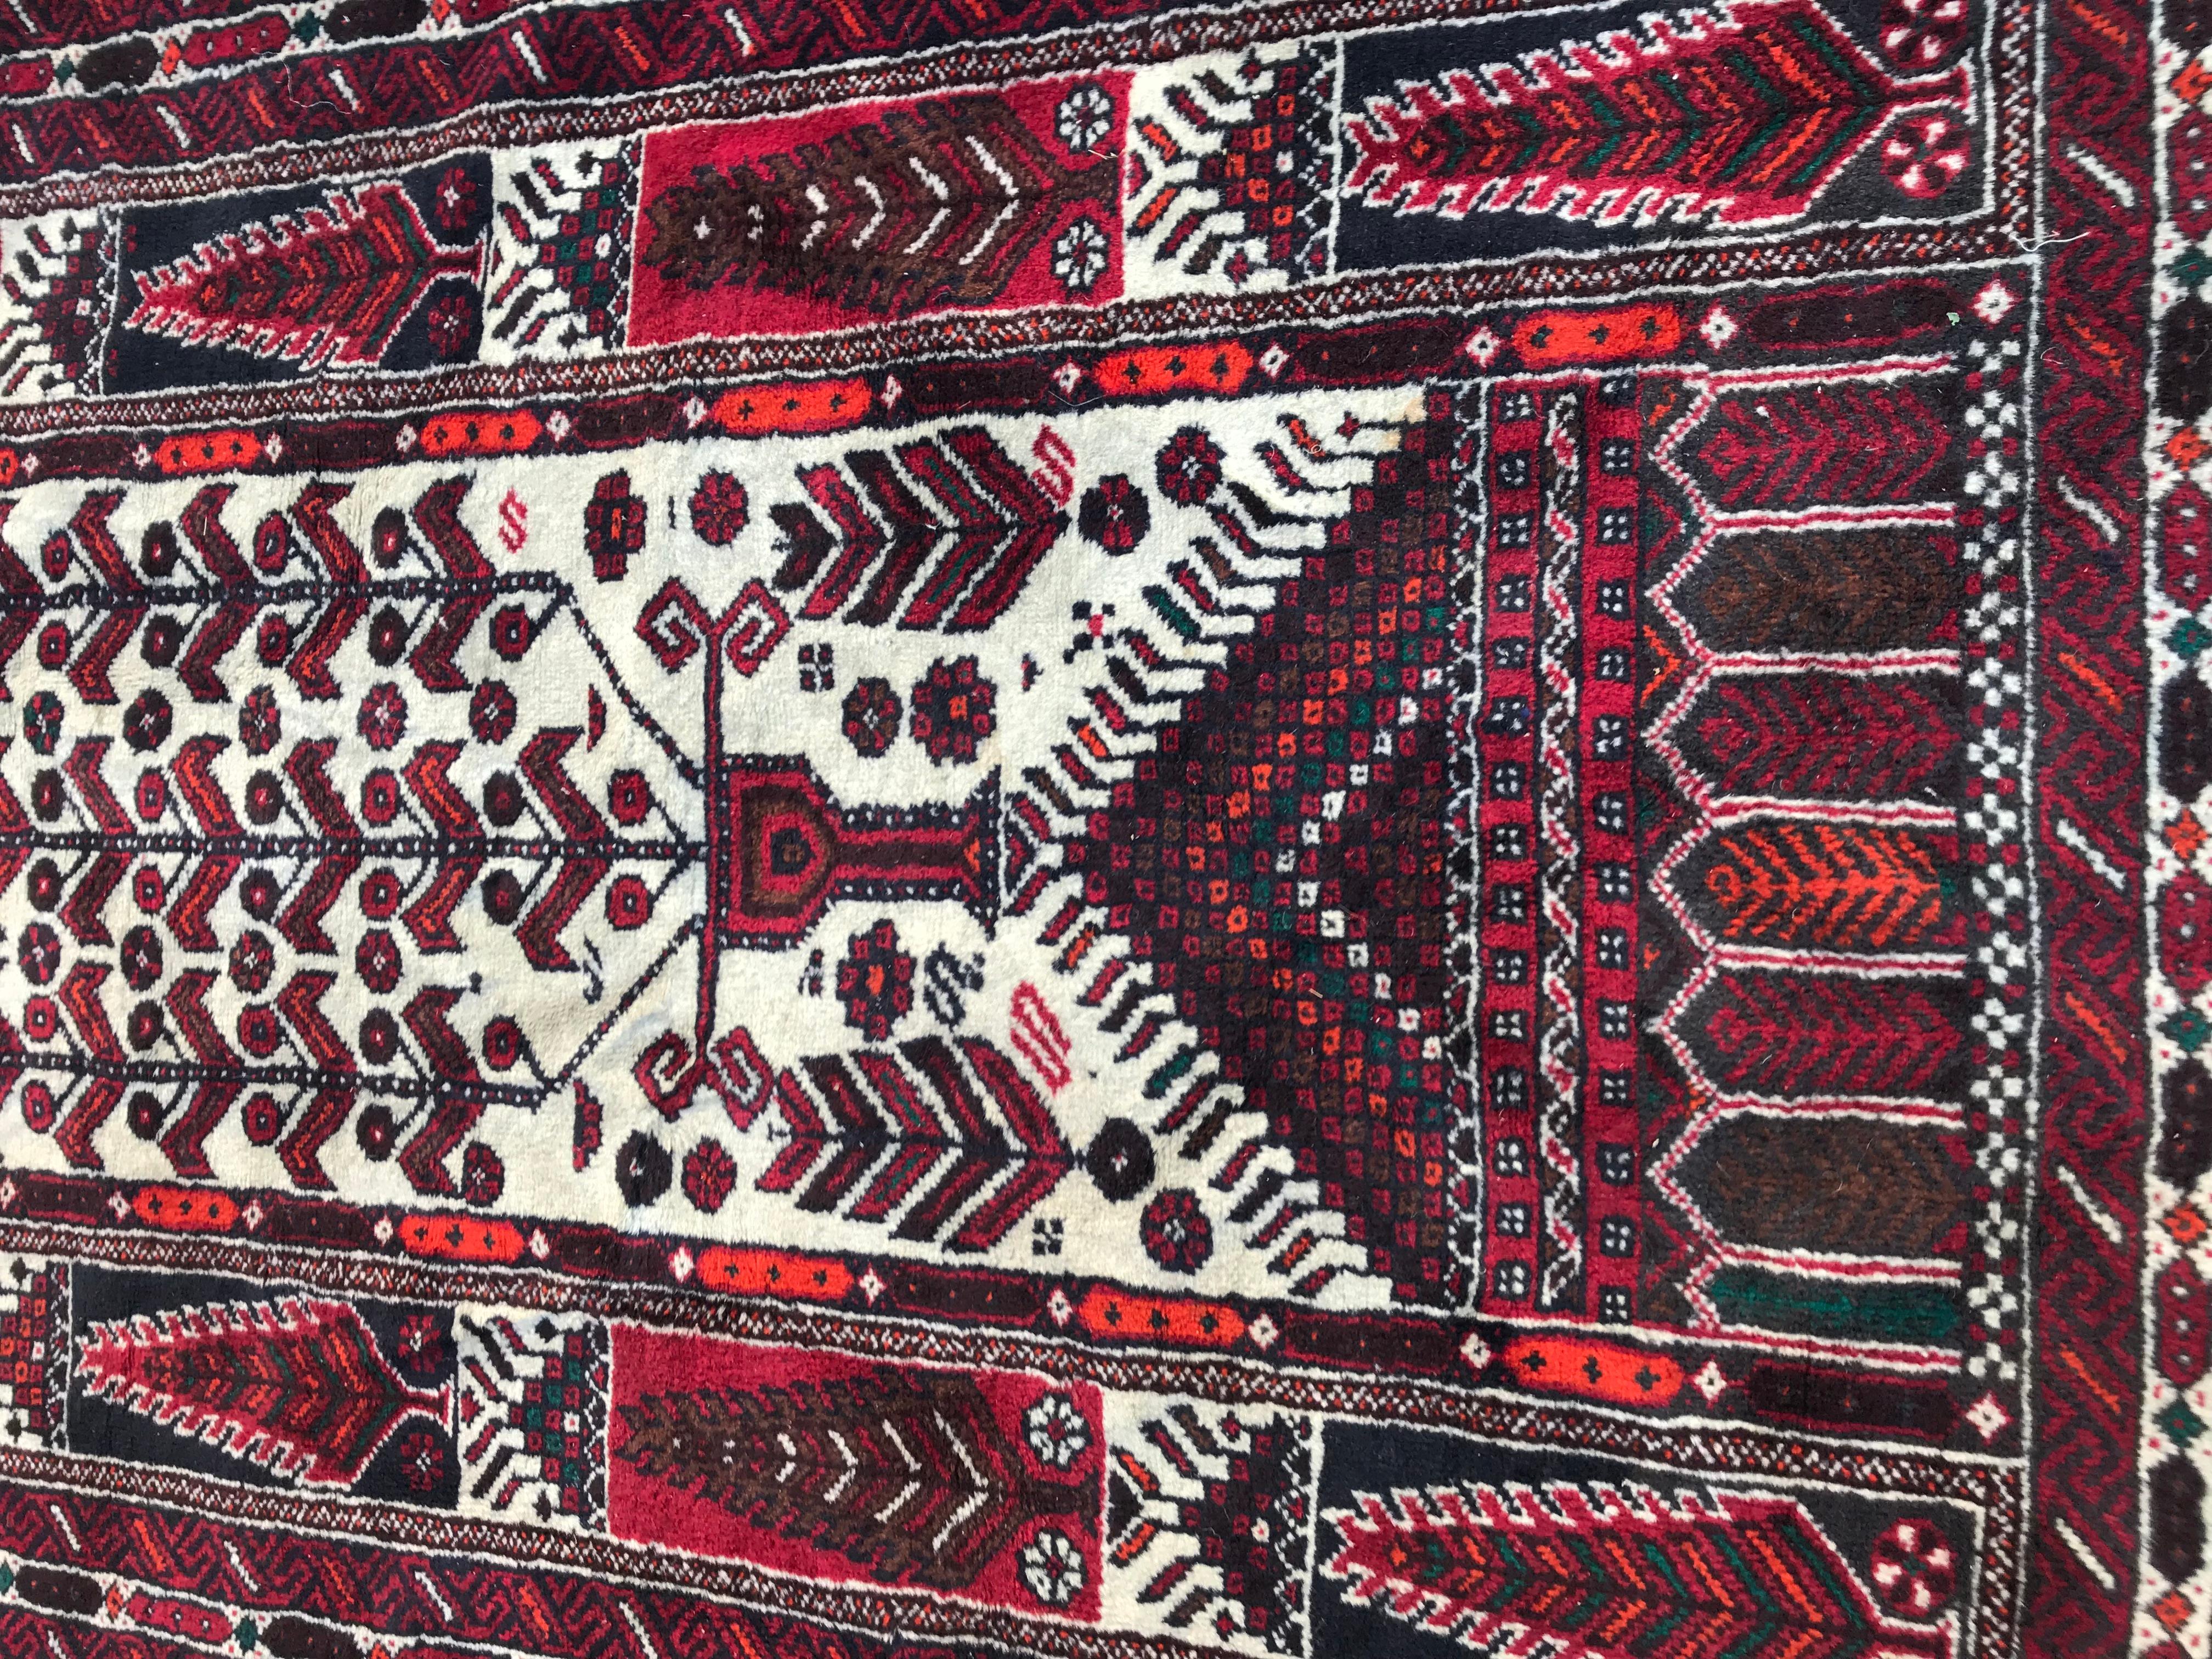 Beautiful 20th century Afghan Baluch rug with a tribal design and nice colors with red, black, orange and purple, entirely hand knotted with wool velvet on cotton foundation.